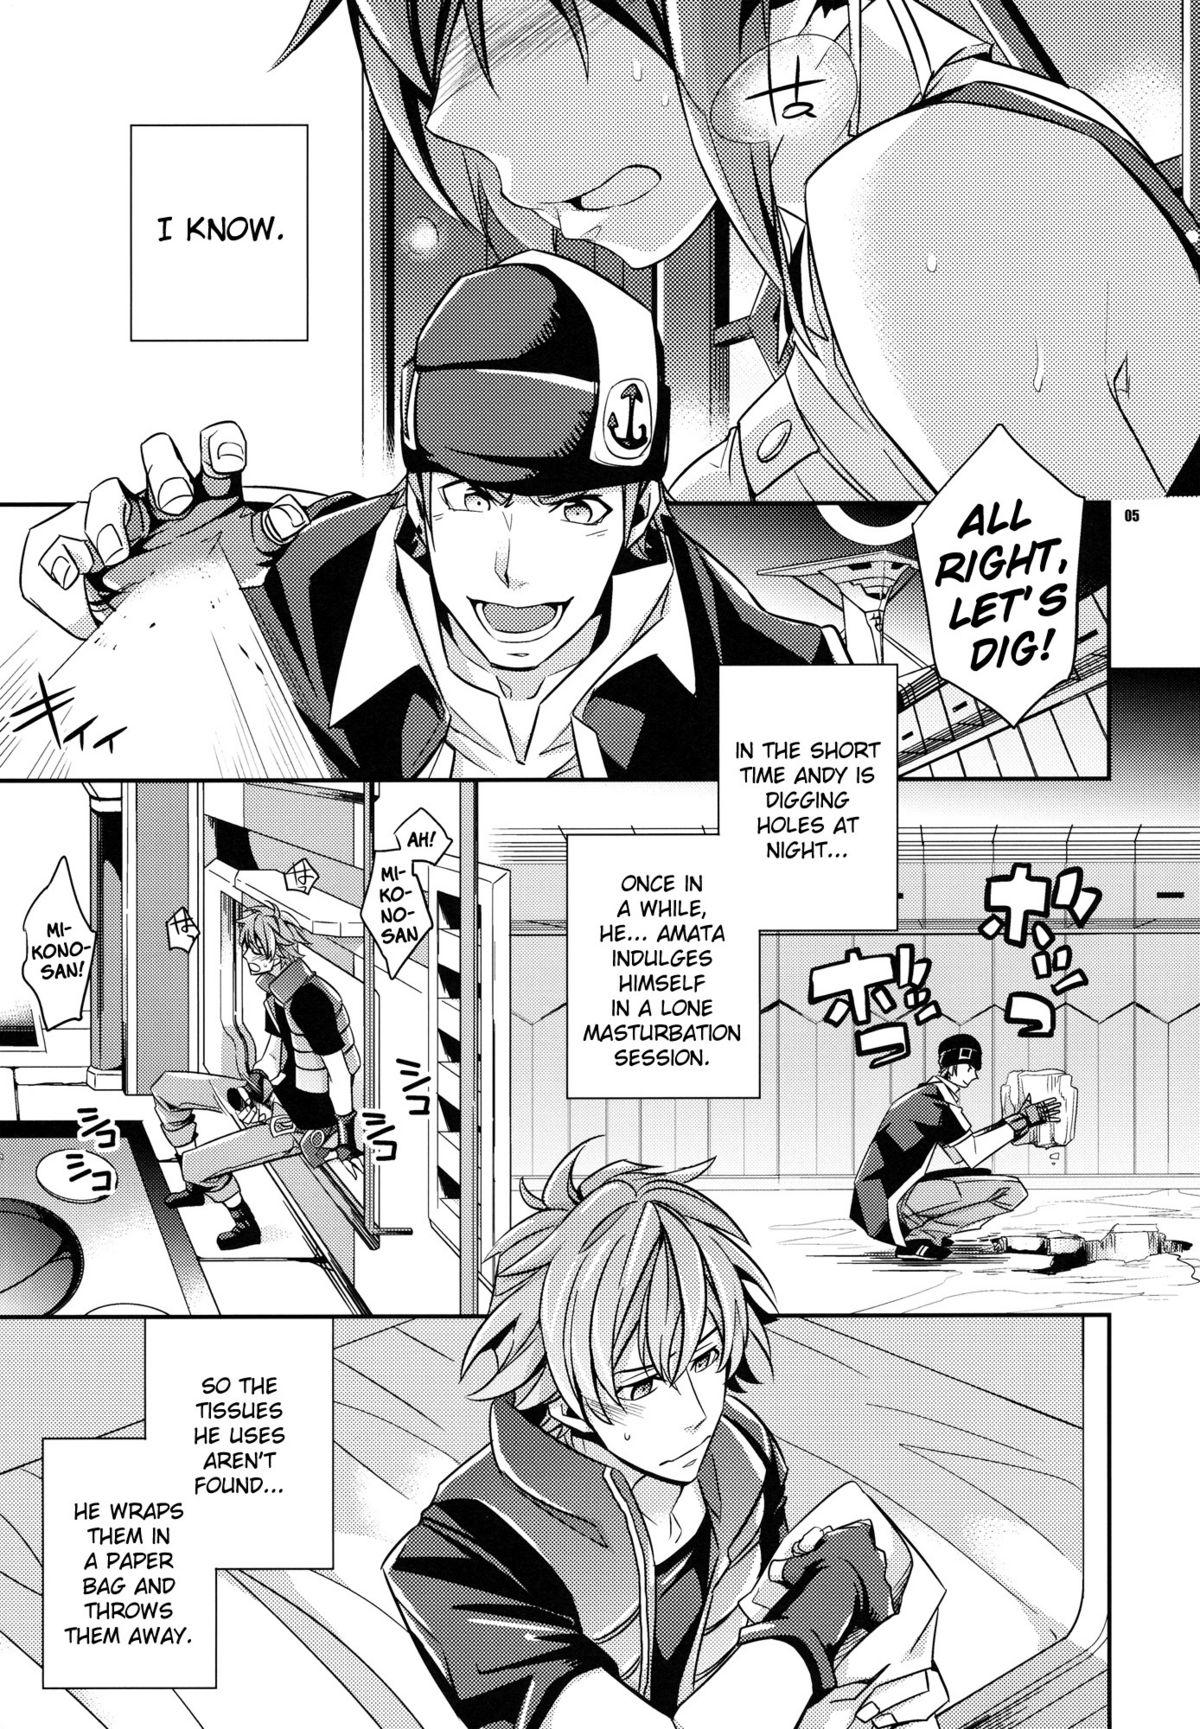 Dirty Talk Zessica no Koufukuron | Zessica's Theory of Happiness - Aquarion evol Blow - Page 3